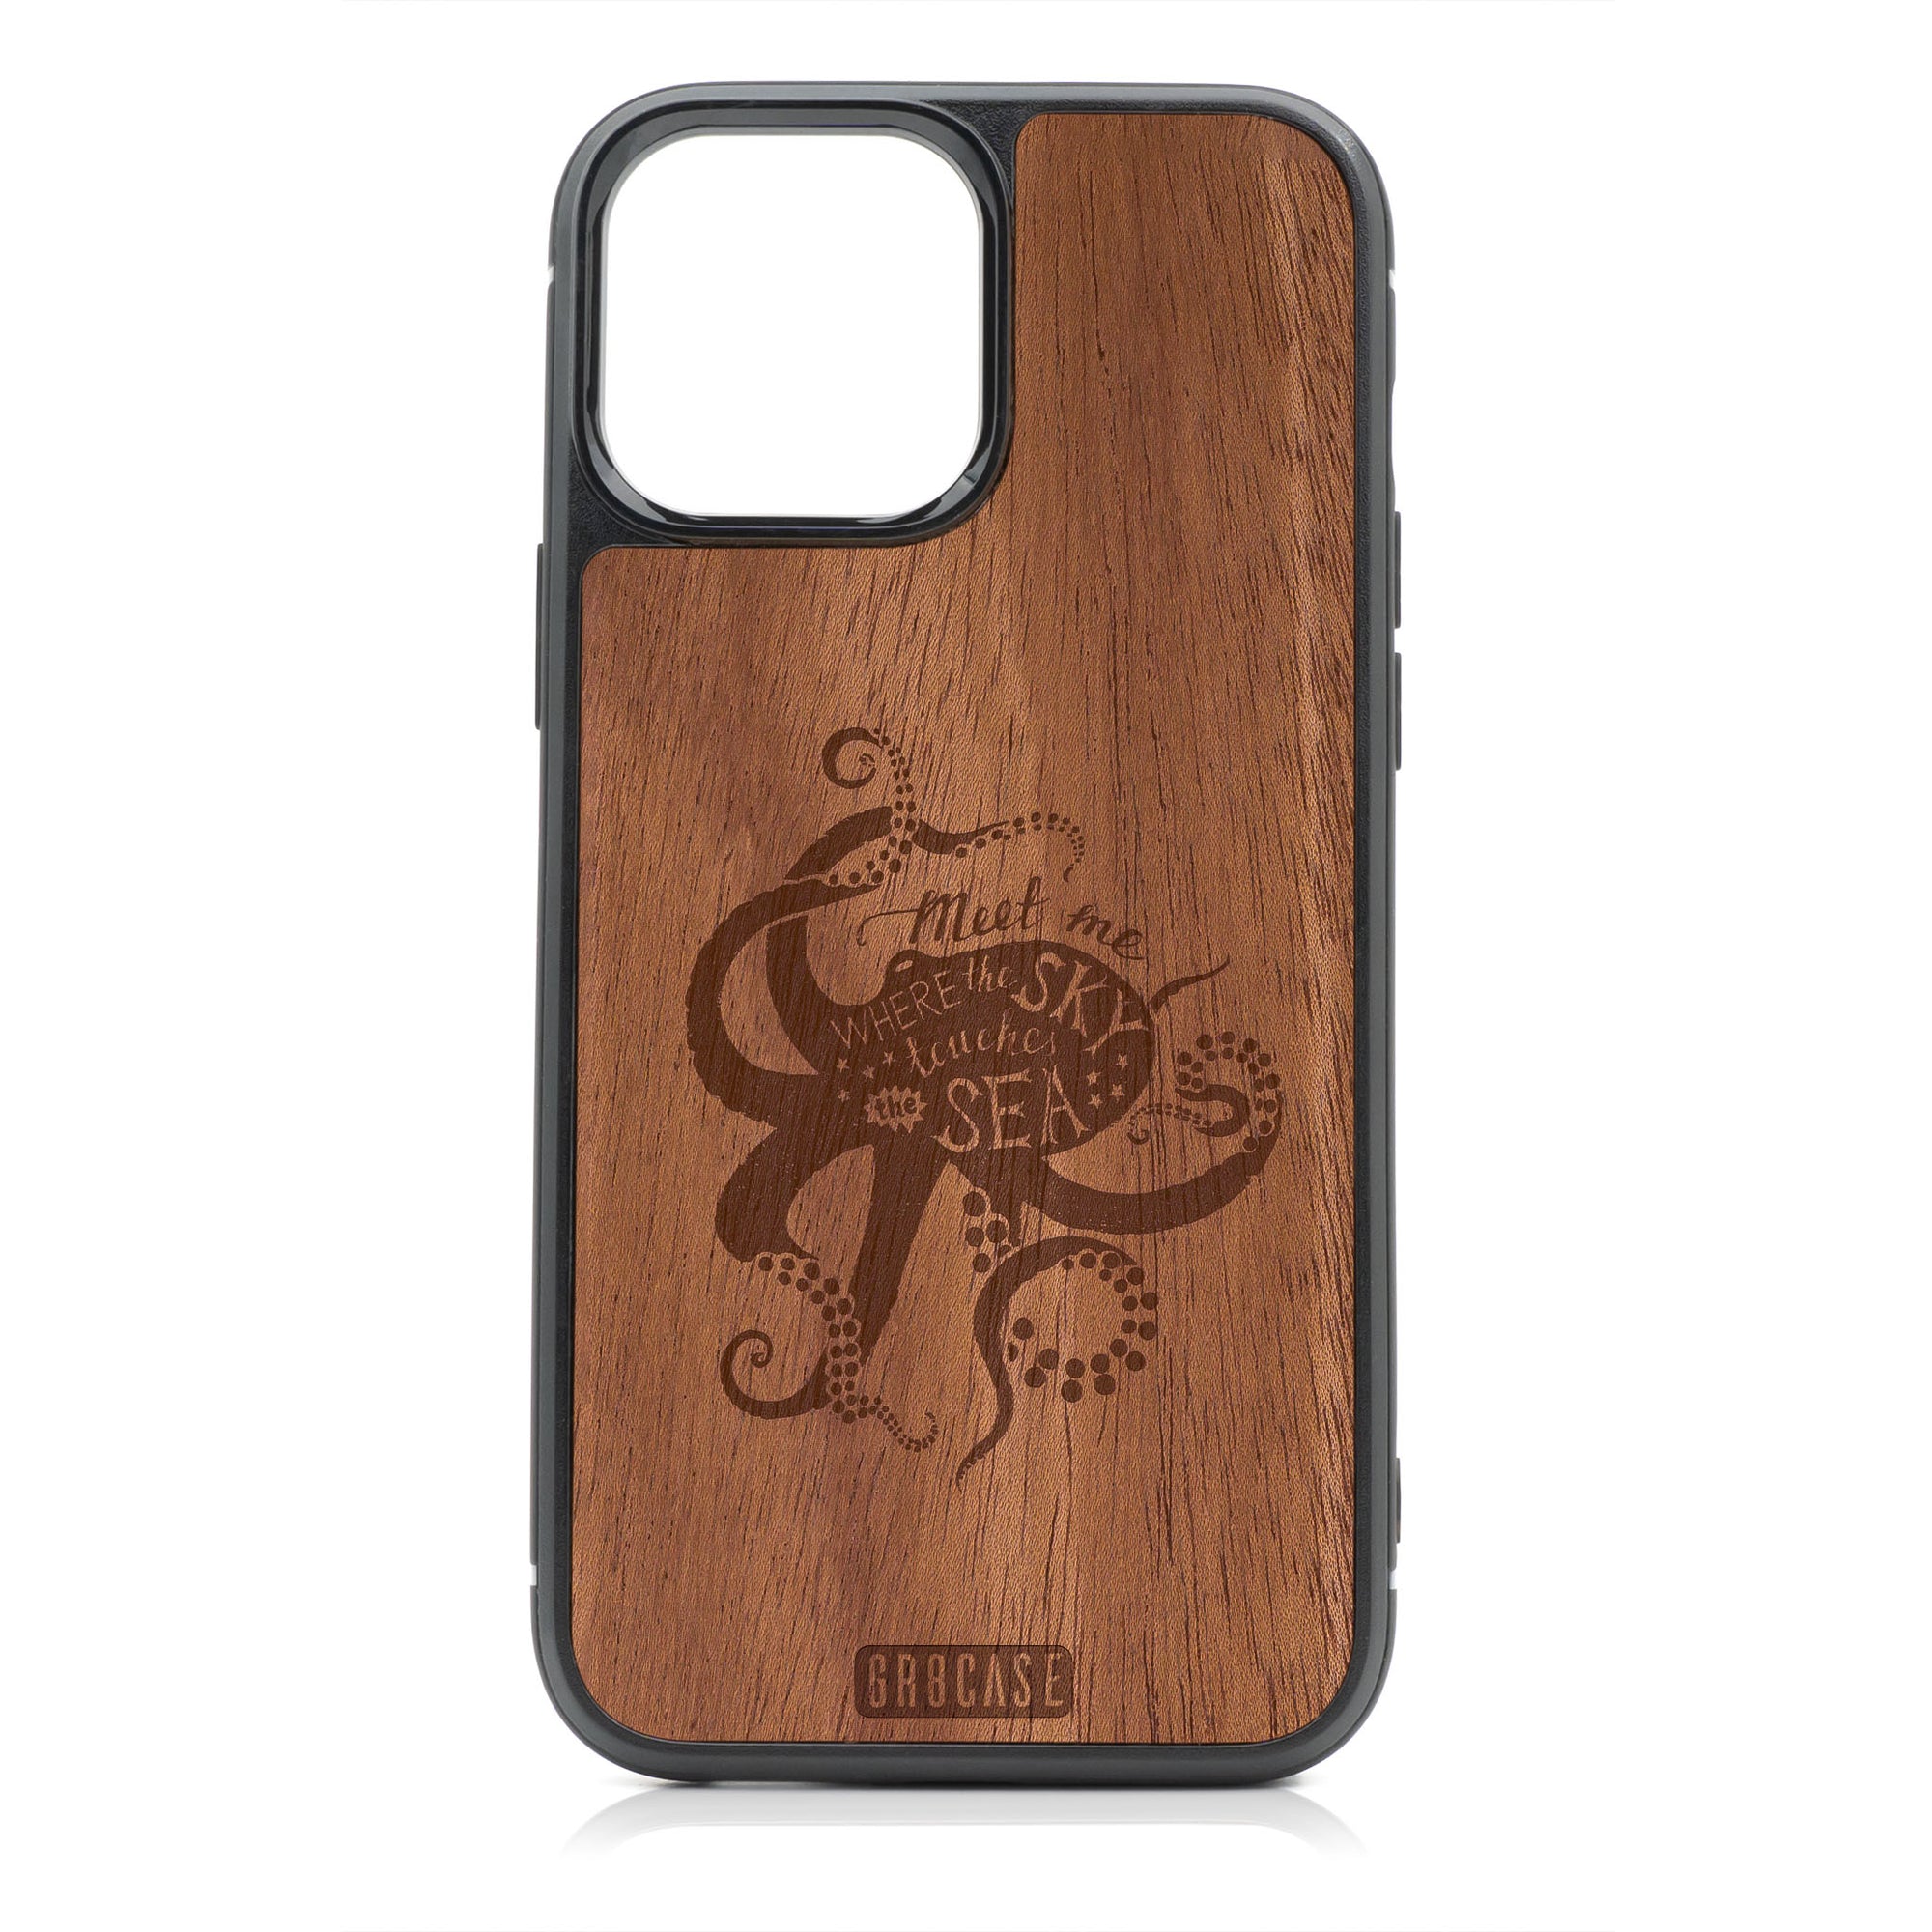 Meet Me Where The Sky Touches The Sea (Octopus) Design Wood Case For iPhone 13 Pro Max